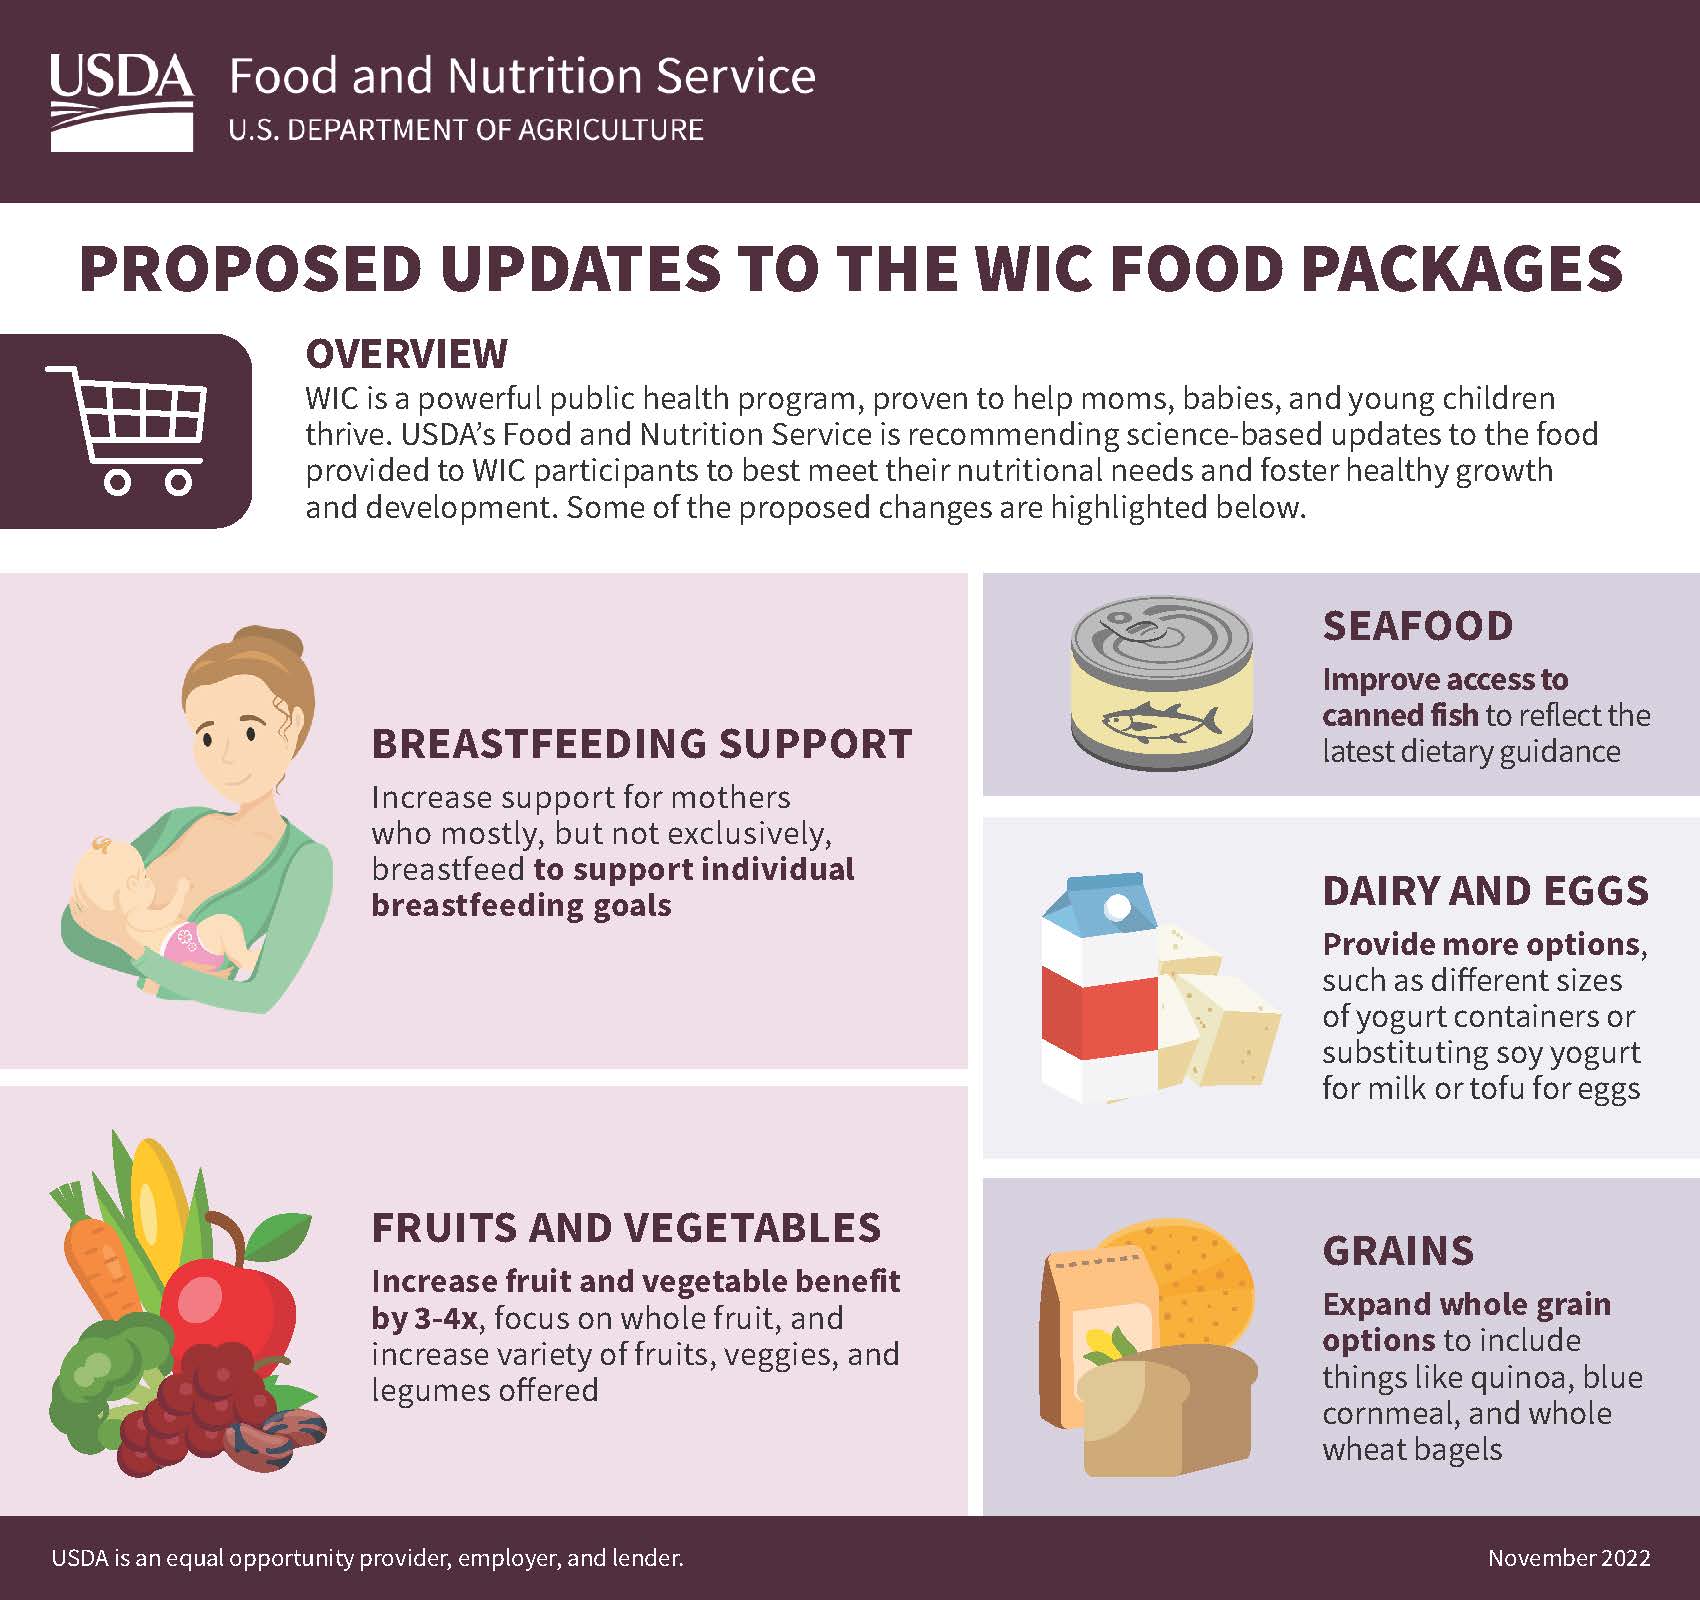 USDA Proposes Science-Pushed Updates to Meals Offered By way of WIC